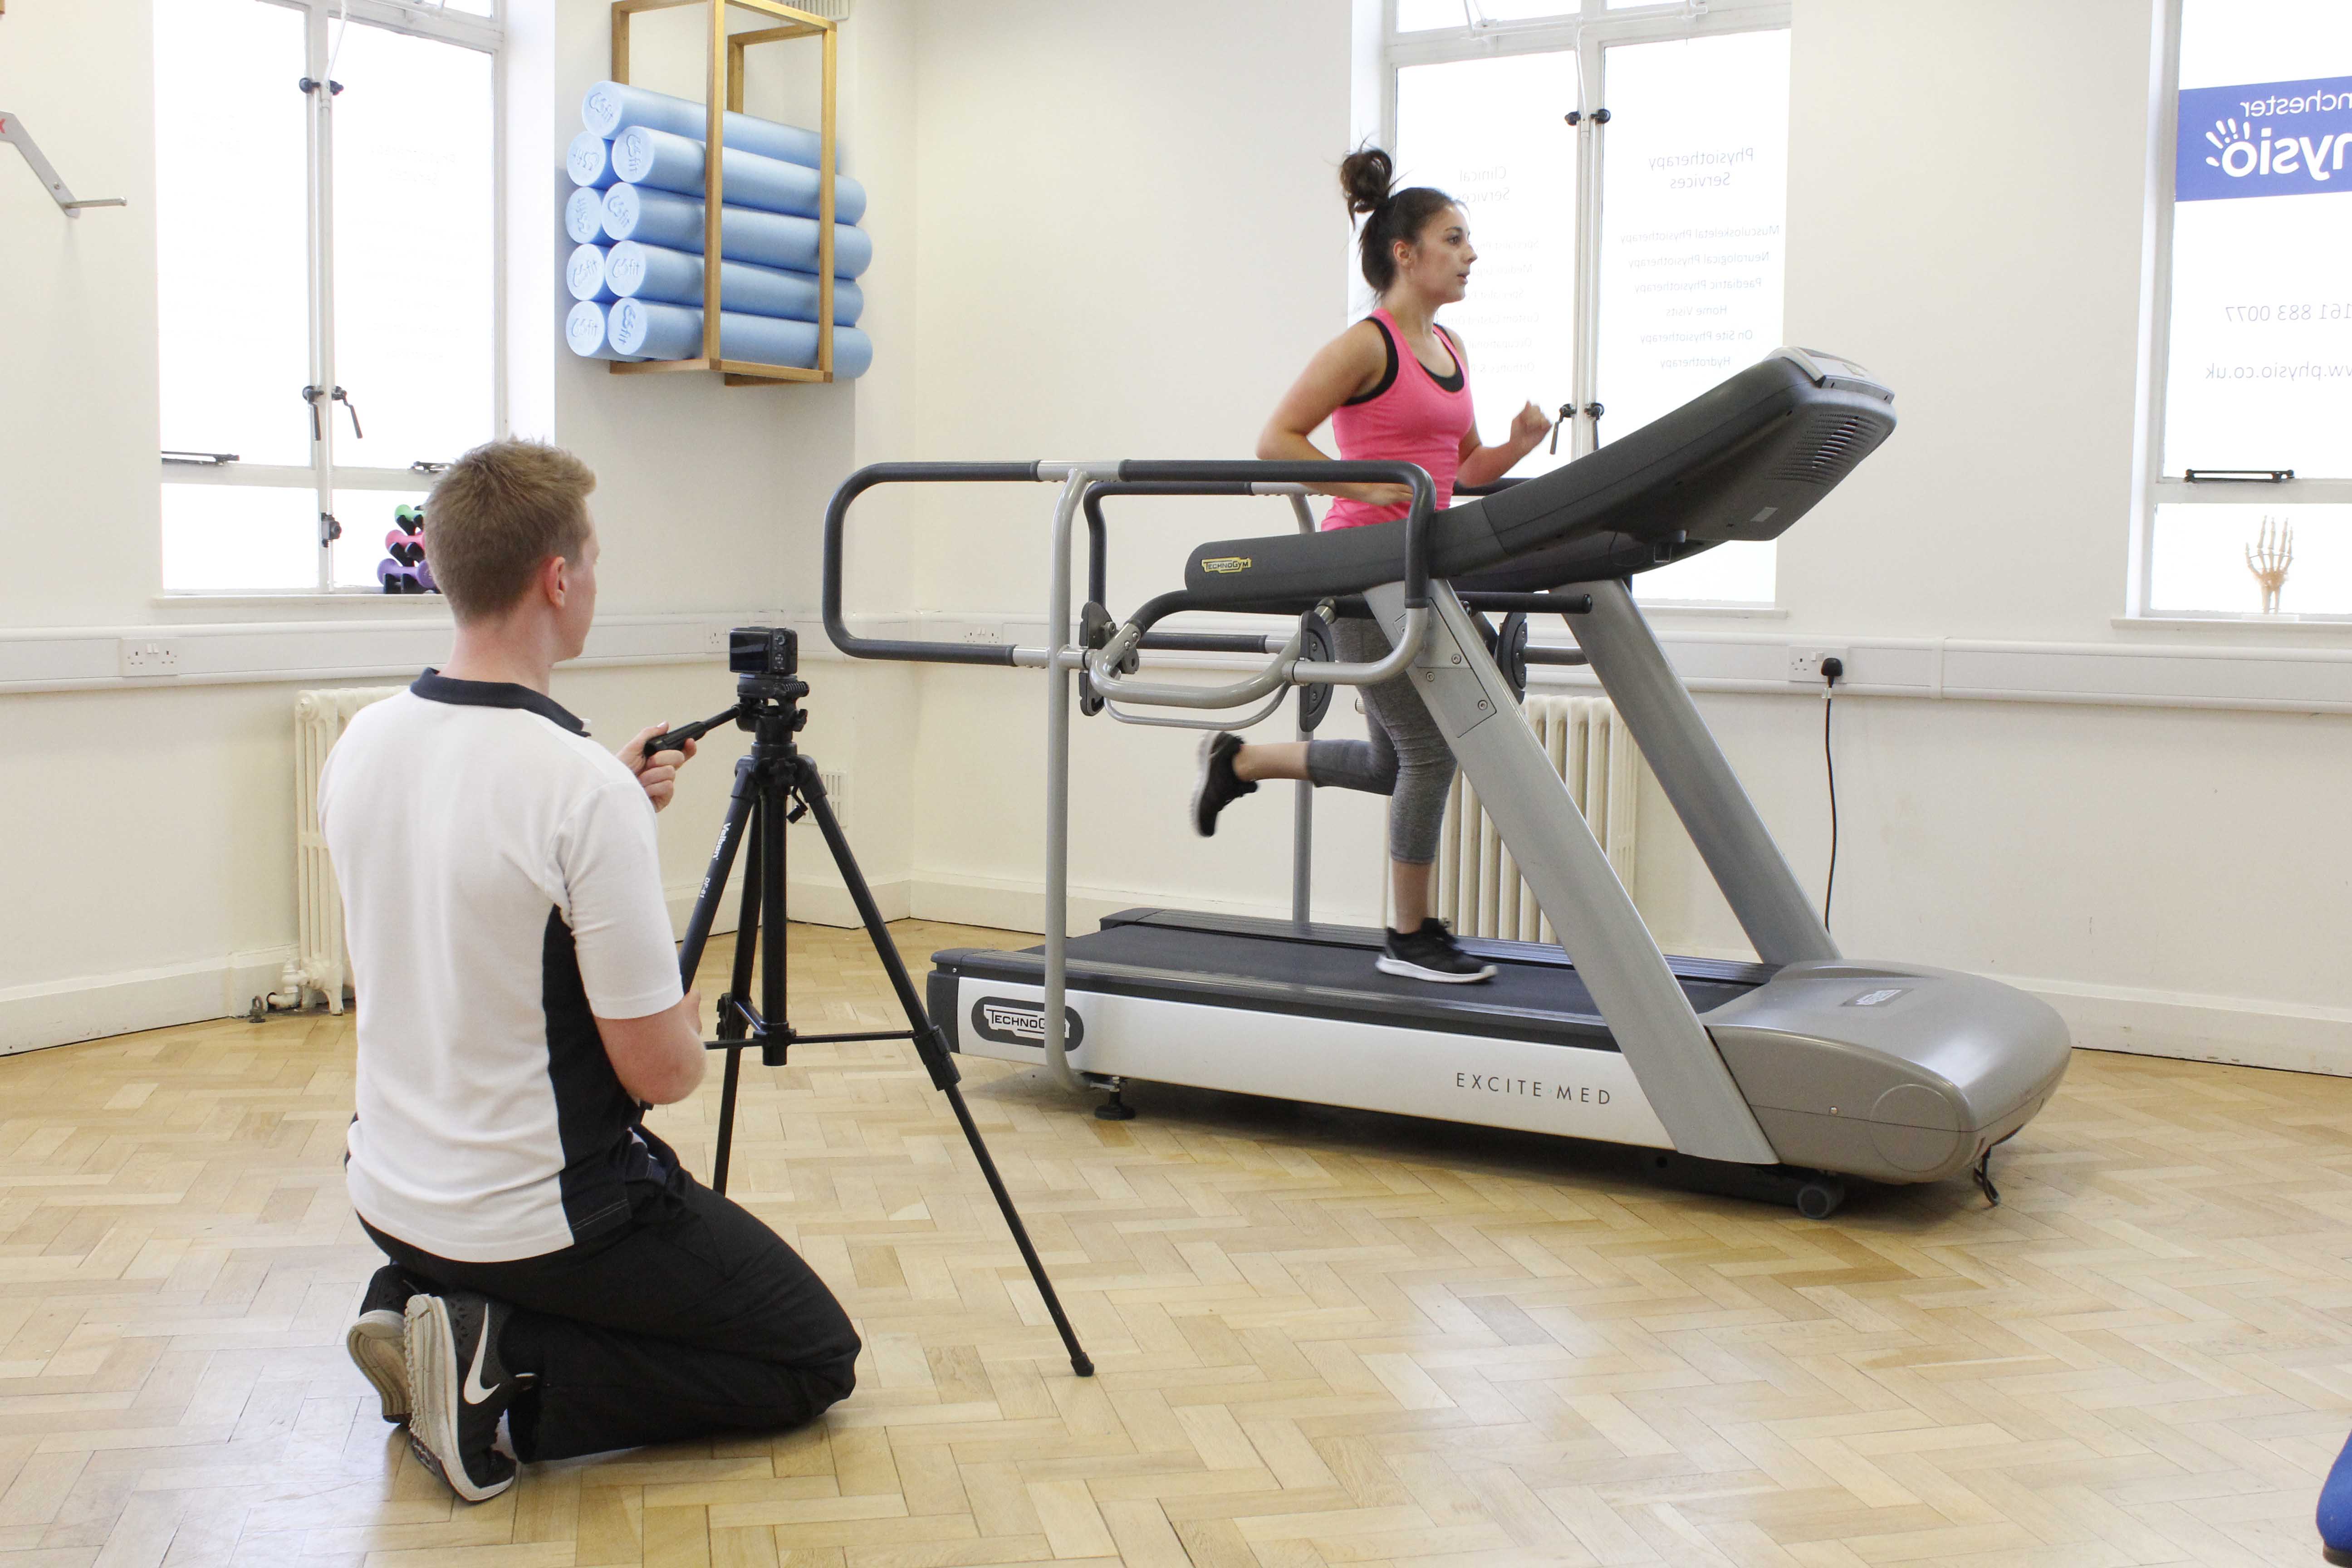 Biomechanical assessment for runners using videography 